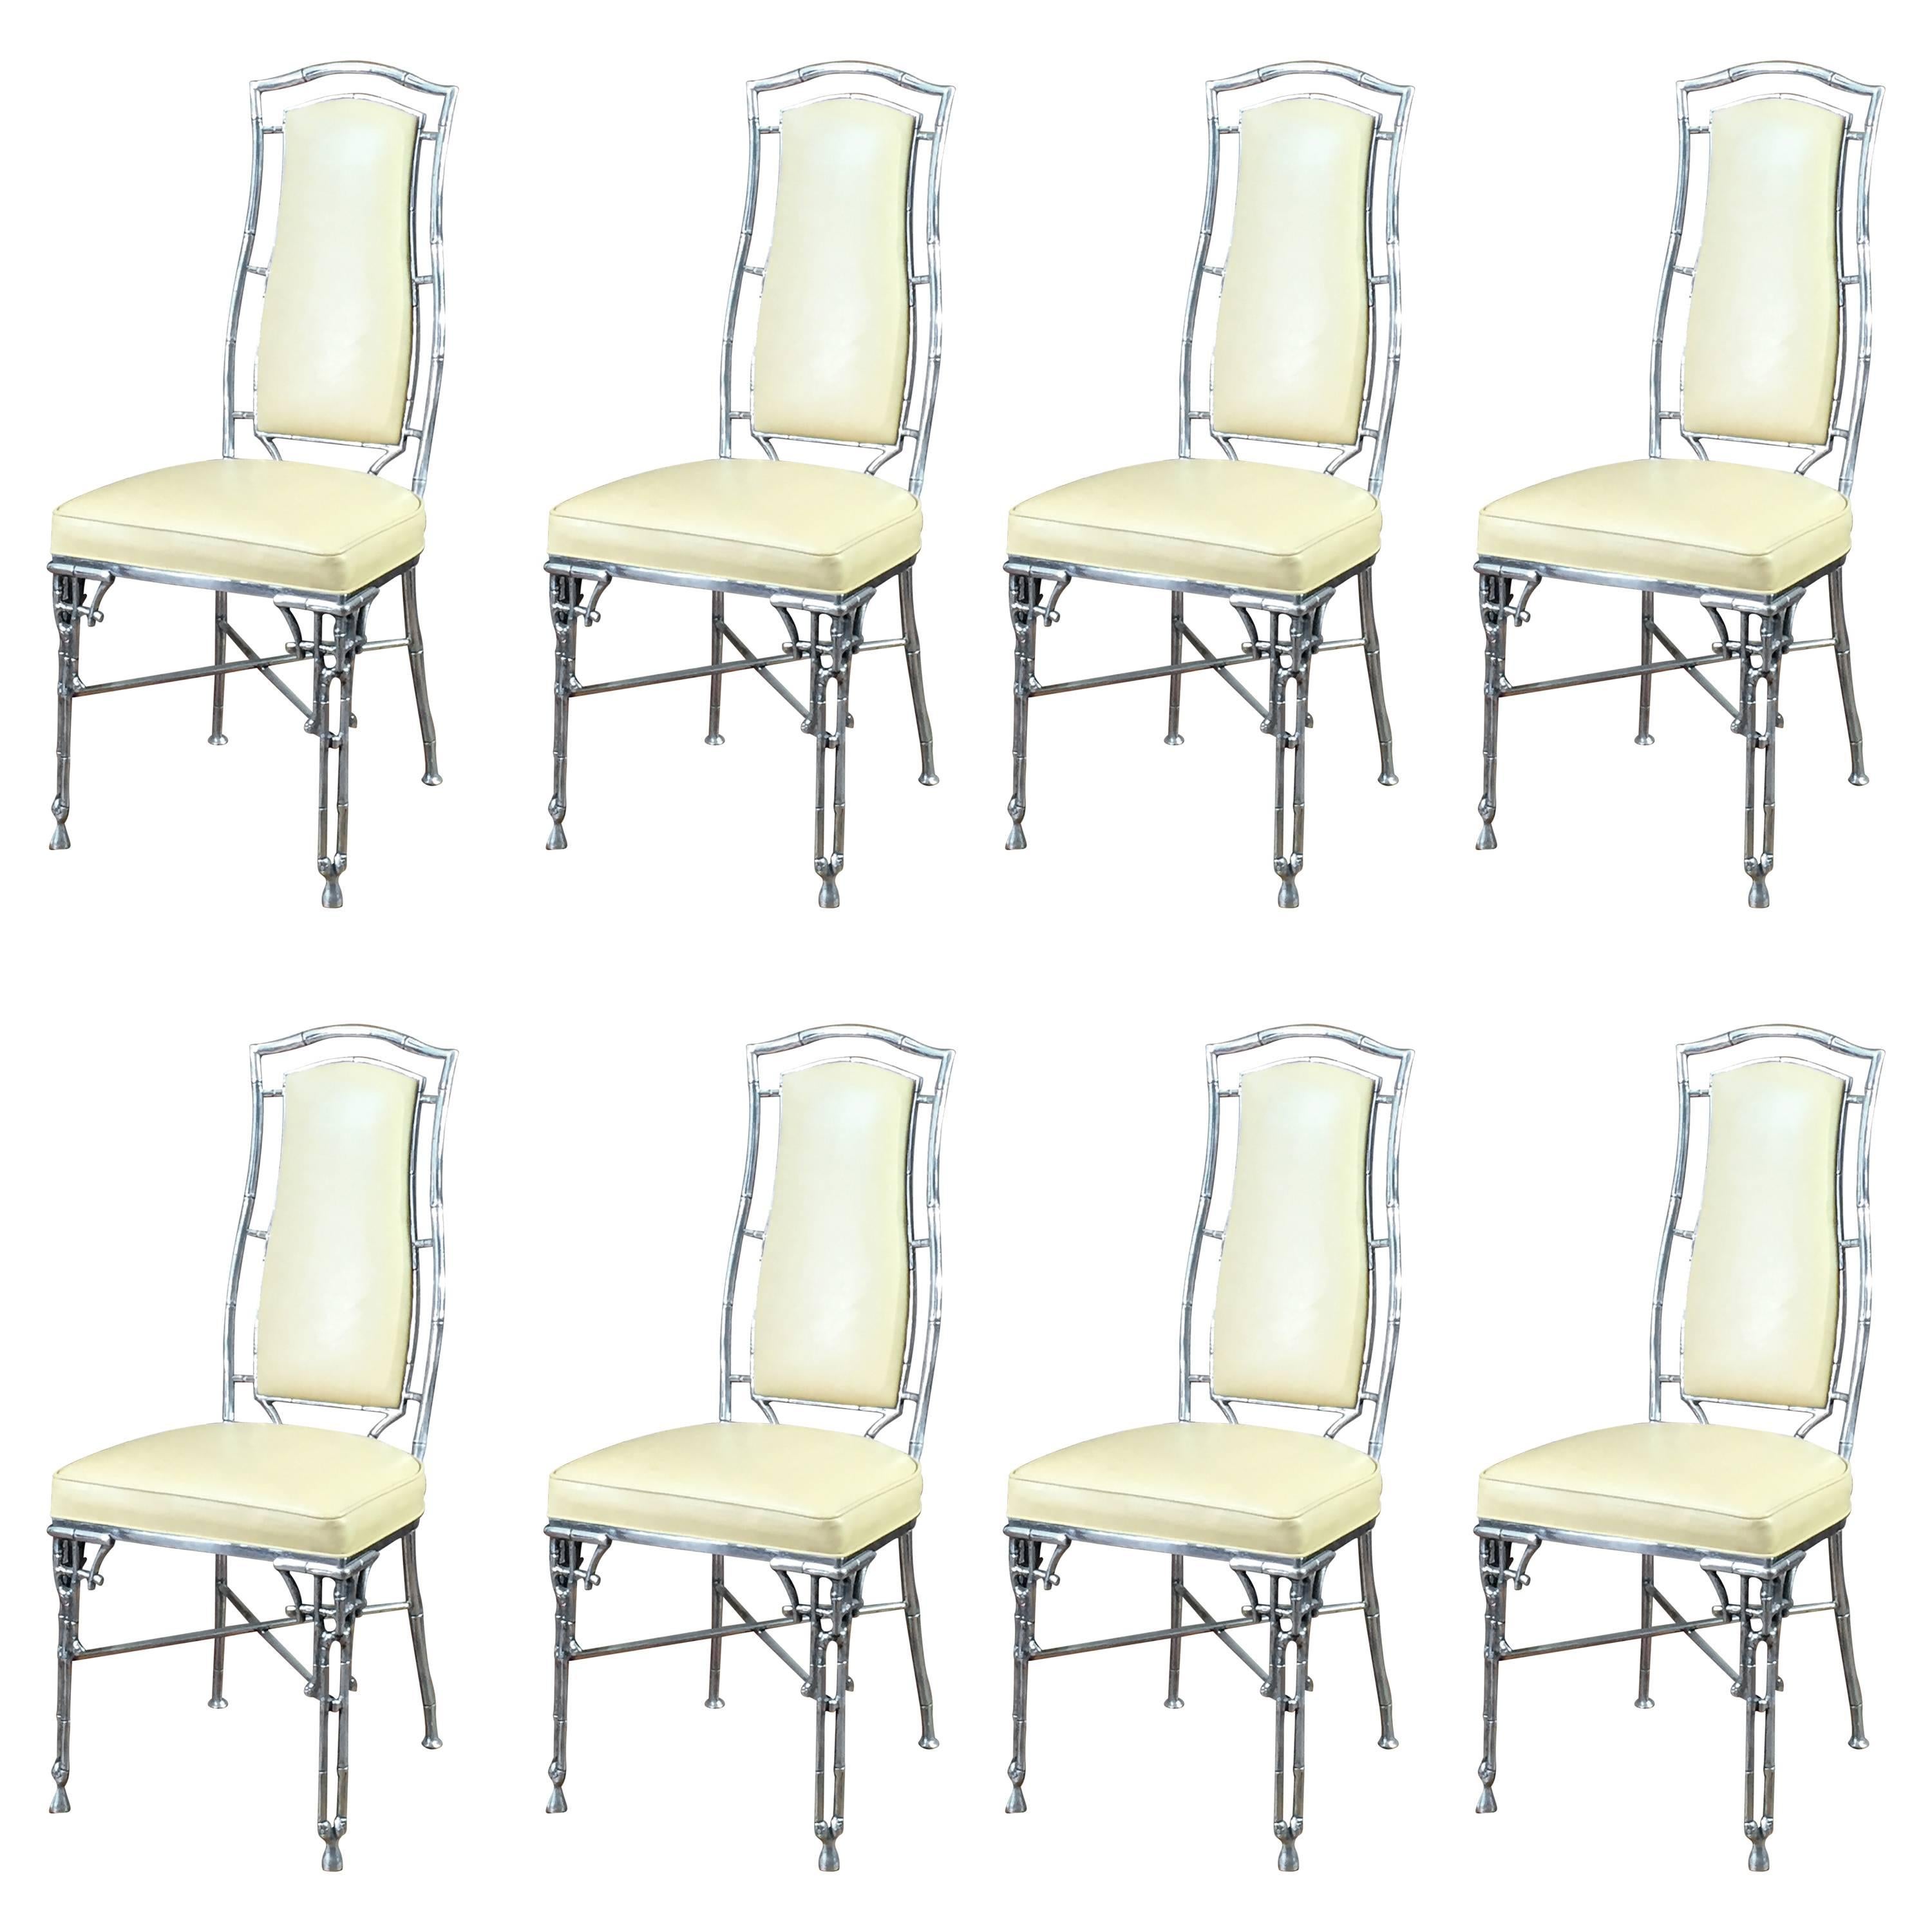 Eight Polished Aluminum Faux Bamboo Dining Chairs